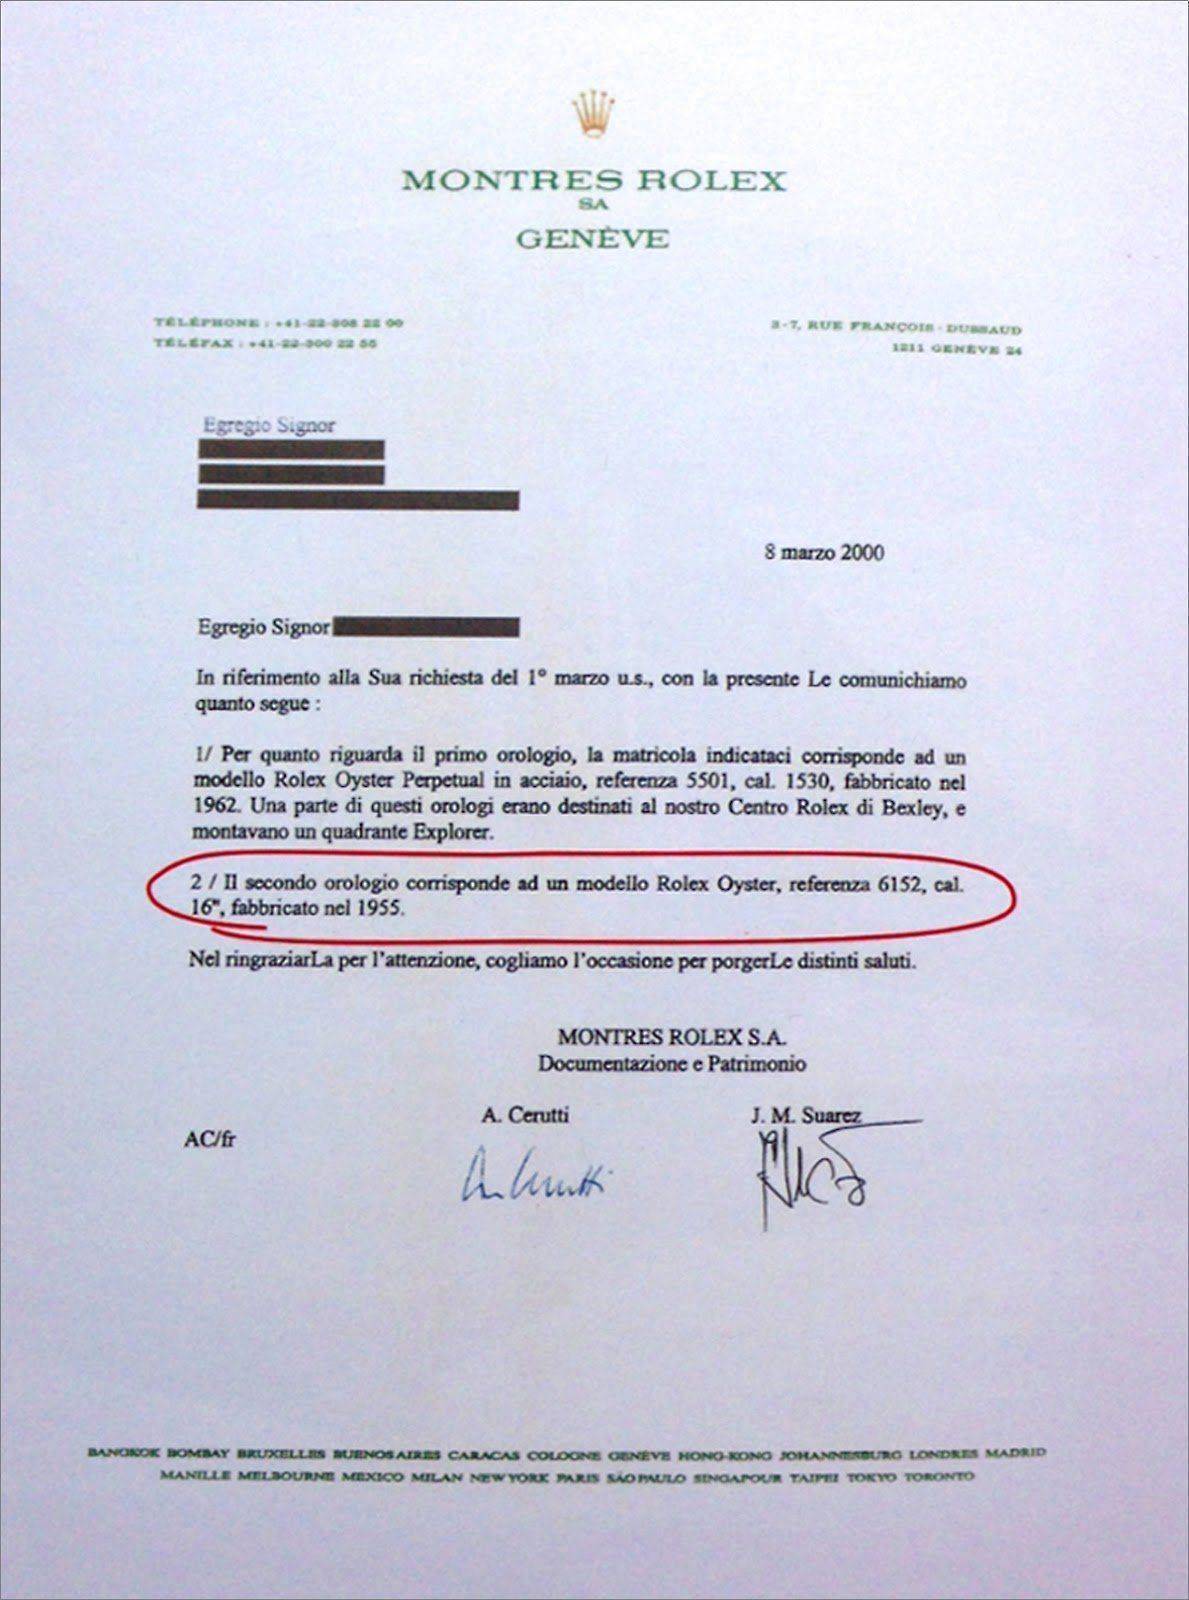 Rolex-Panerai-Authentication-Letter-from-2000.jpg